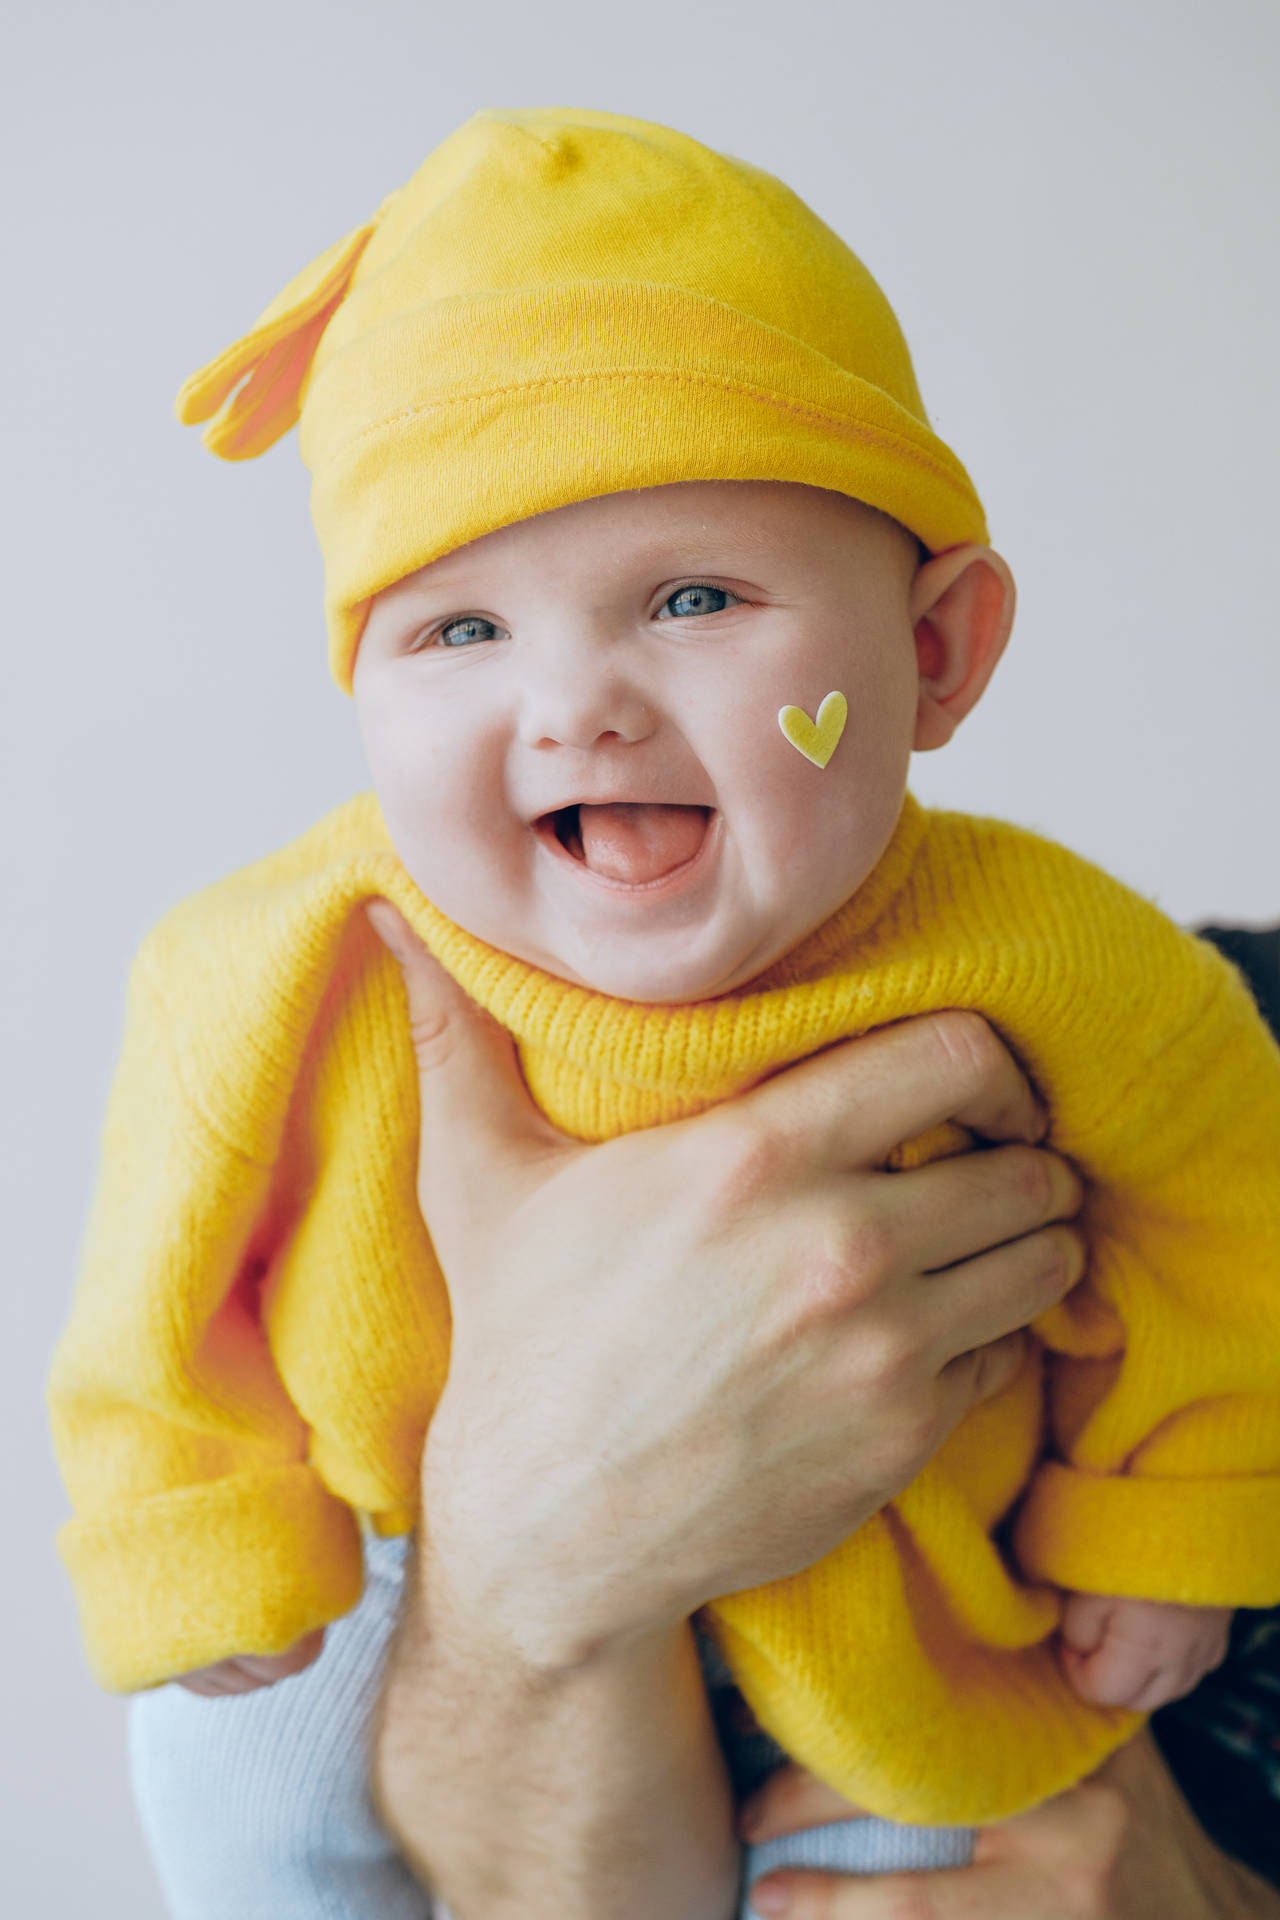 Smiling Baby Hd Background